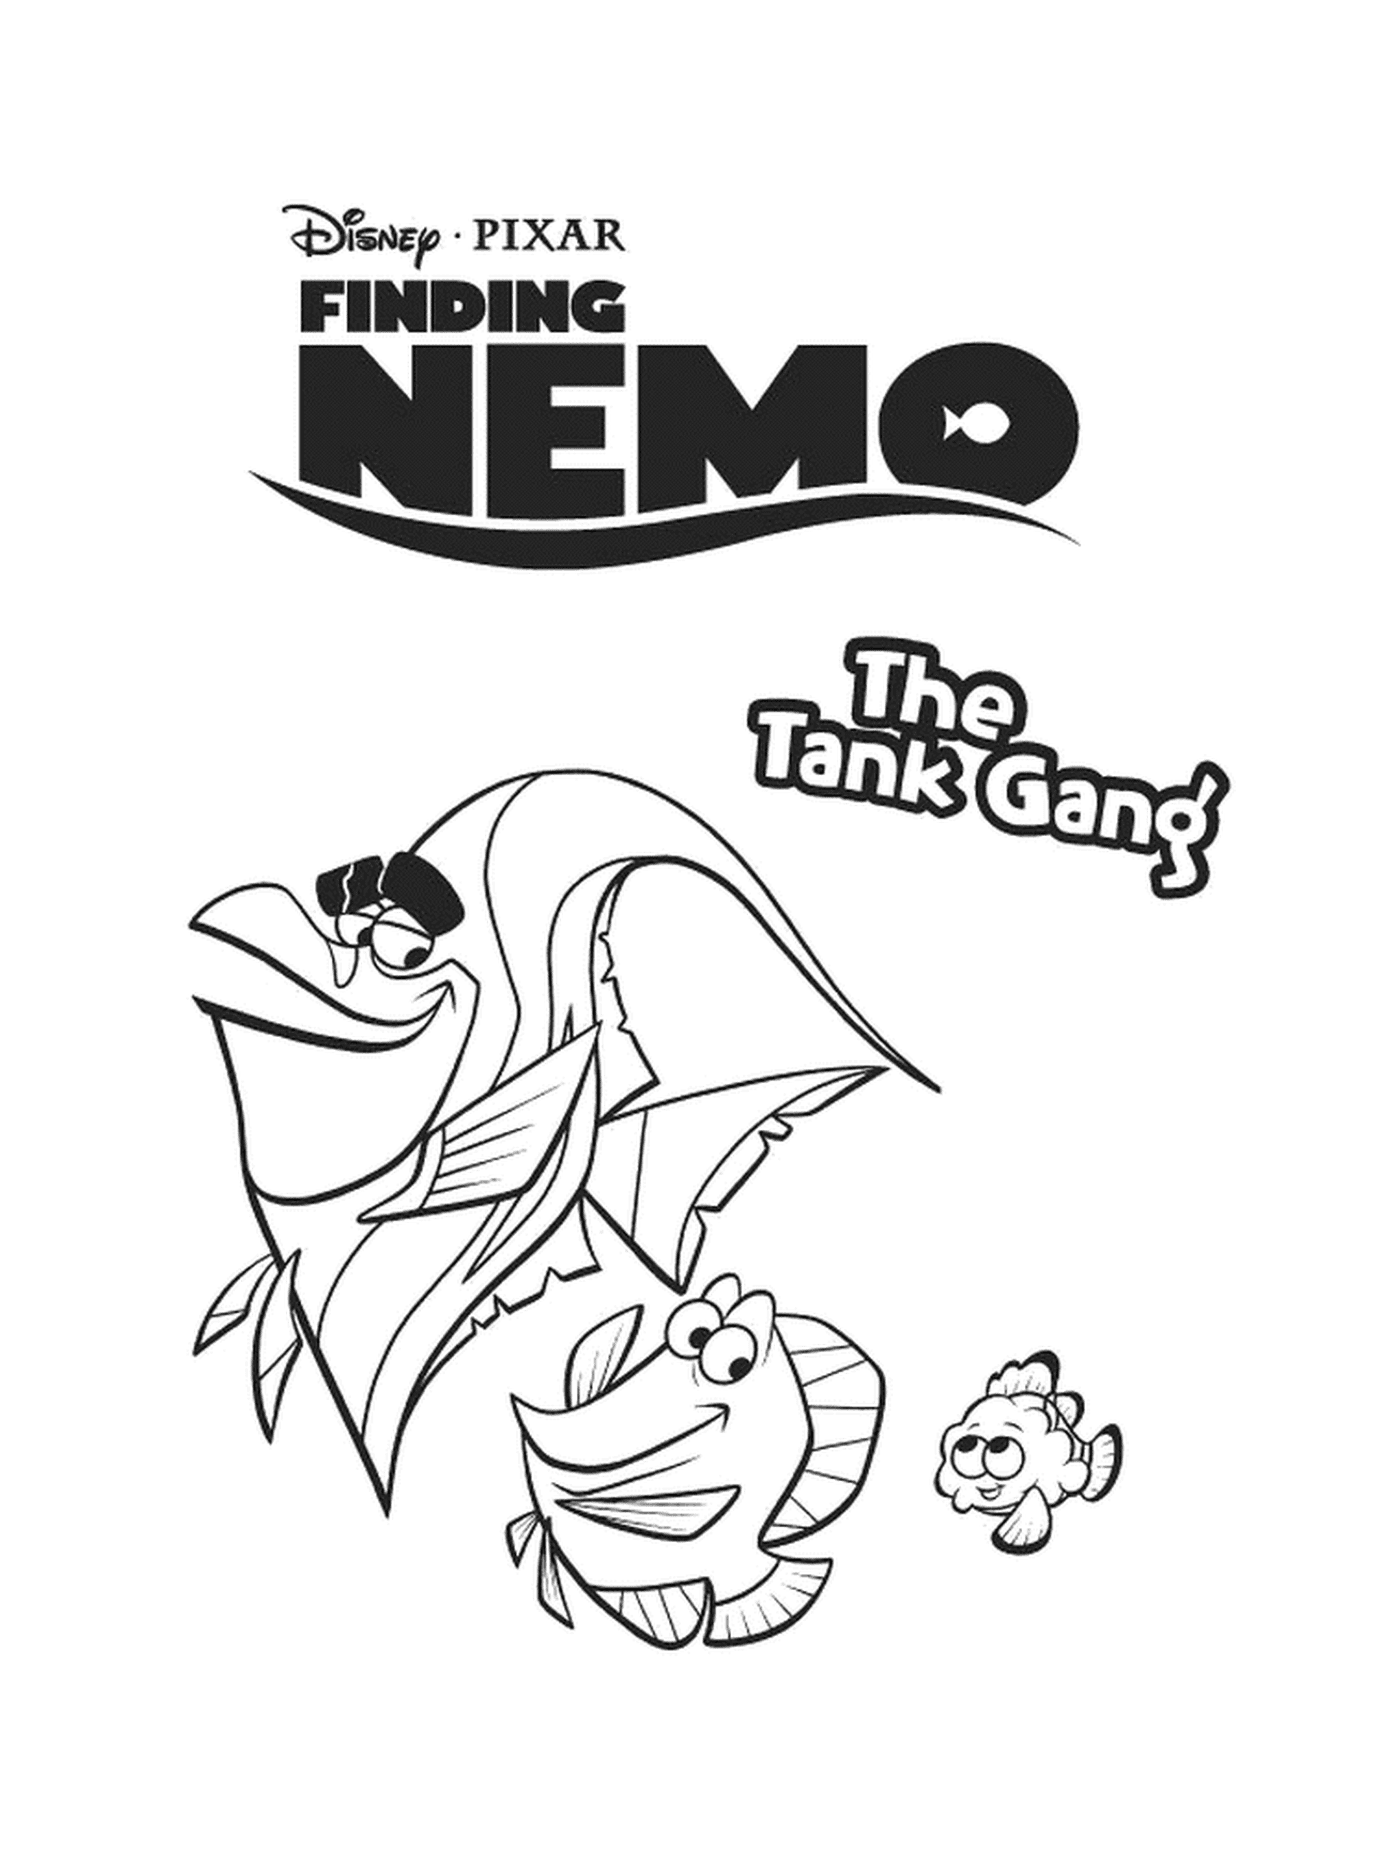  Find Nemo - The tank group 